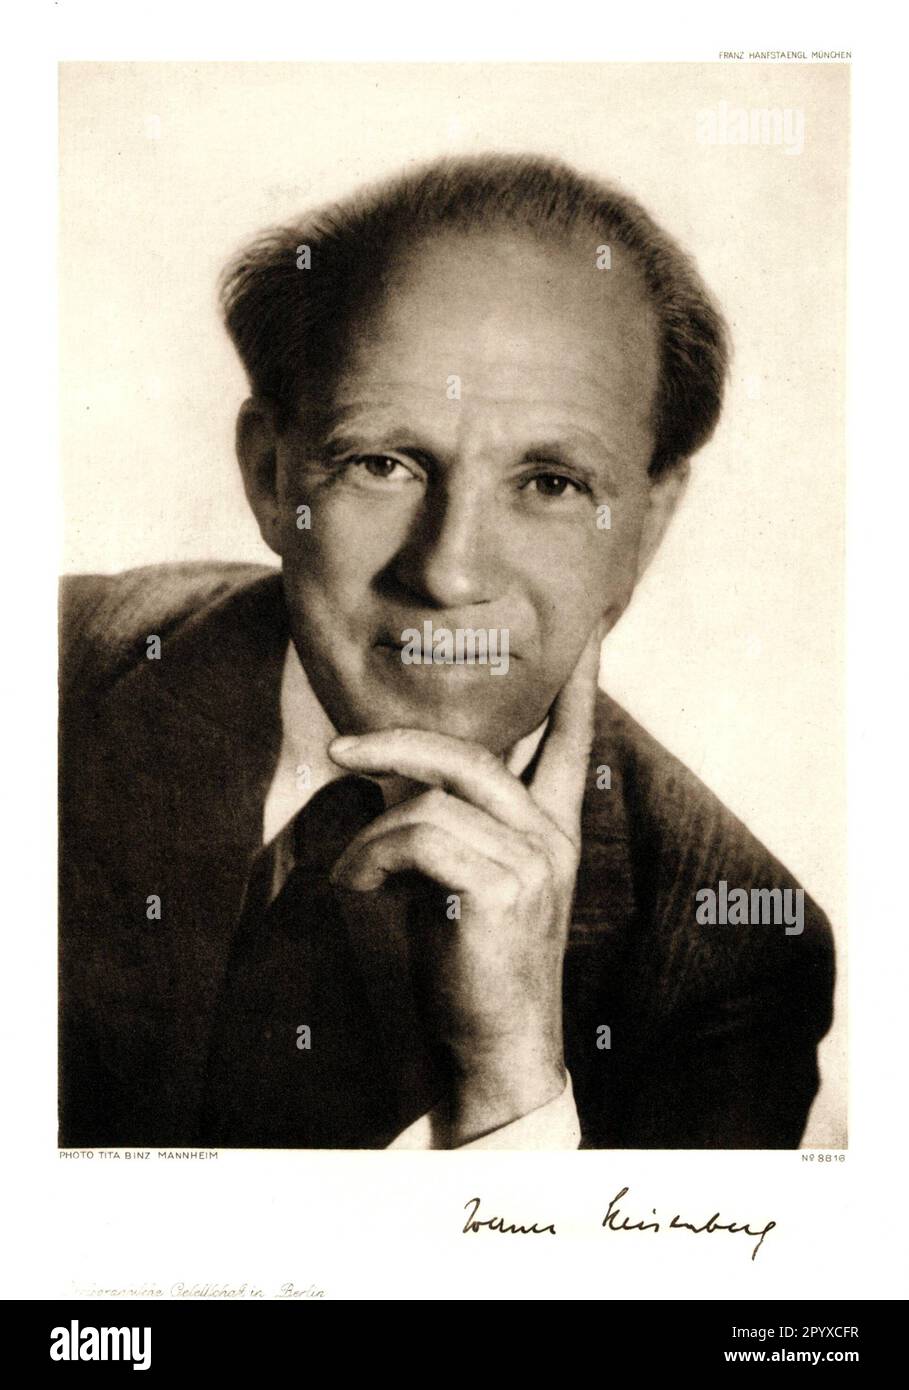 Werner Karl Heisenberg (1901-1976), German physicist. Heisenberg received the Nobel Prize in Physics in 1932. Photograph by Tita Binz, Mannheim. Photo: Heliogravure, Corpus Imaginum, Hanfstaengl. collection (undated photograph). [automated translation] Stock Photo